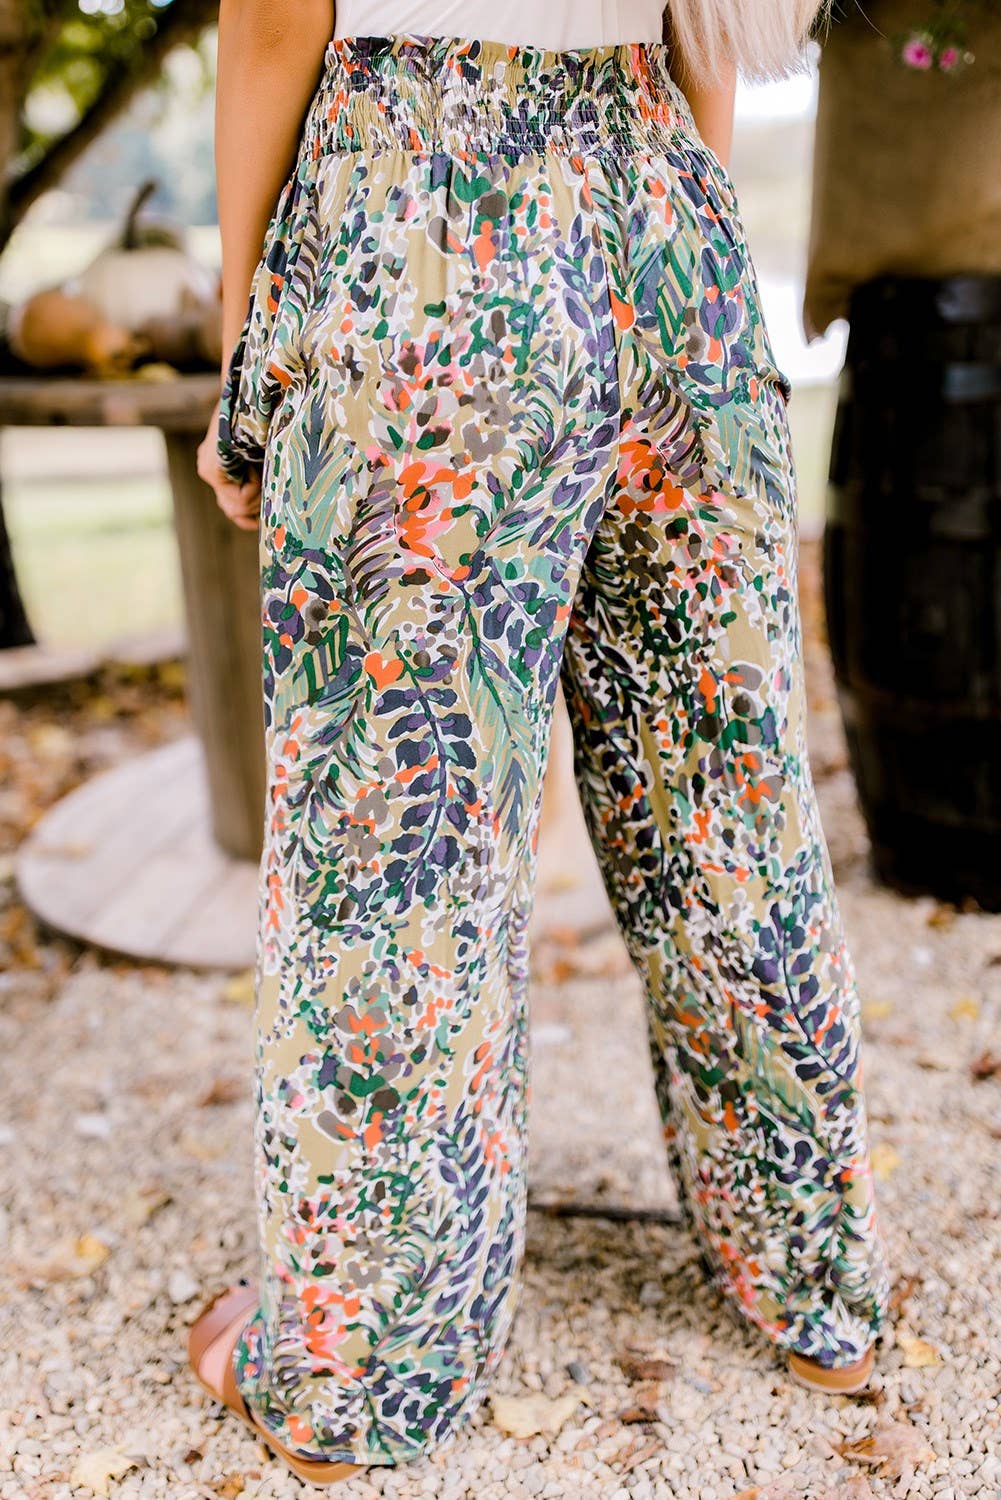 The Ava Floral Palazzo Pants